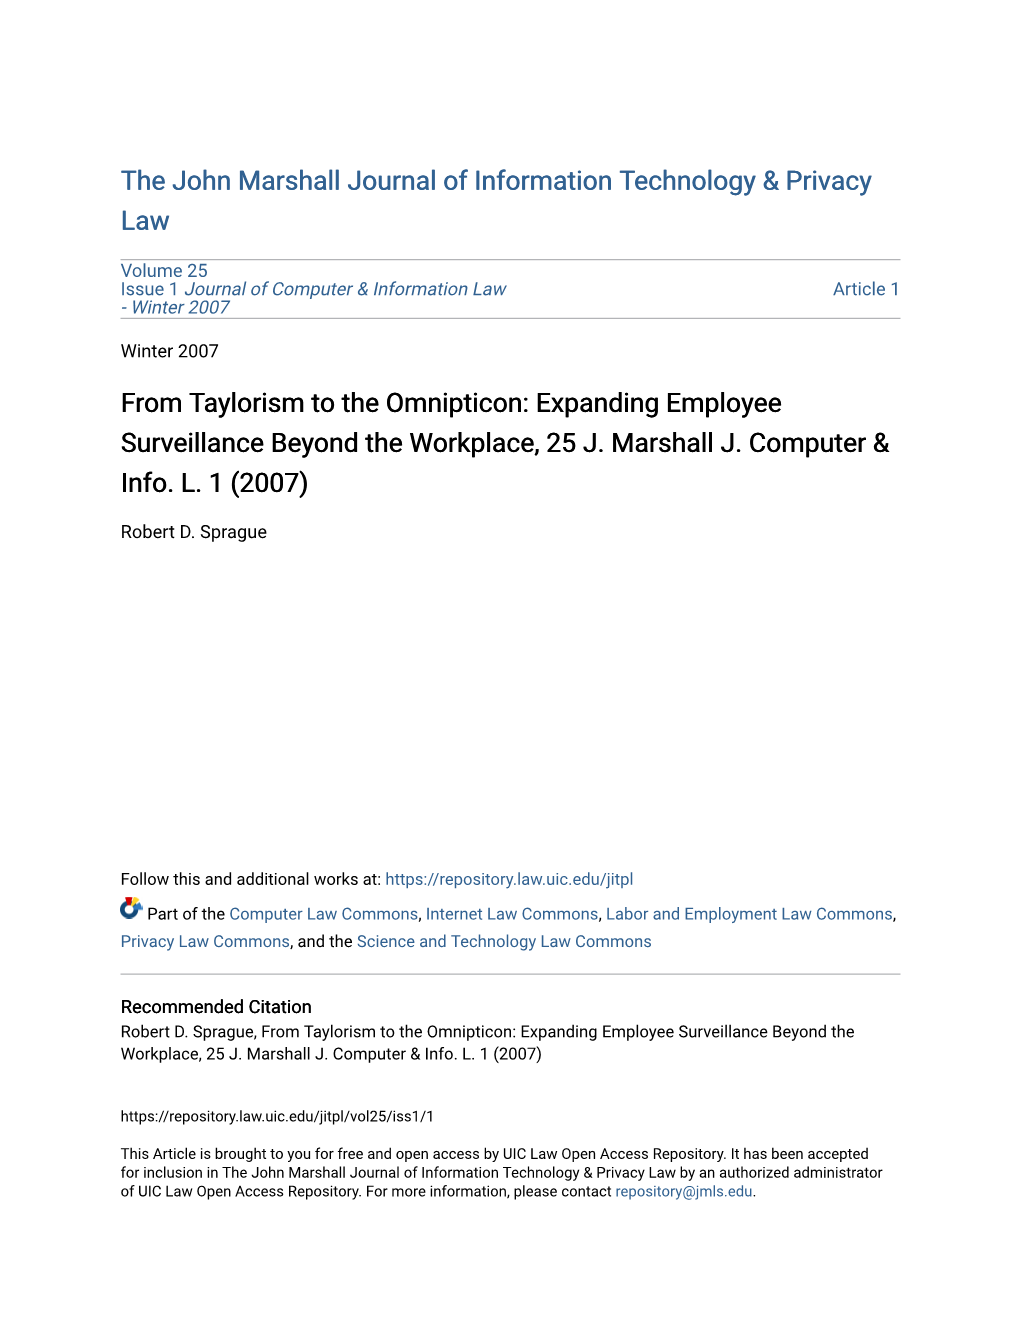 From Taylorism to the Omnipticon: Expanding Employee Surveillance Beyond the Workplace, 25 J